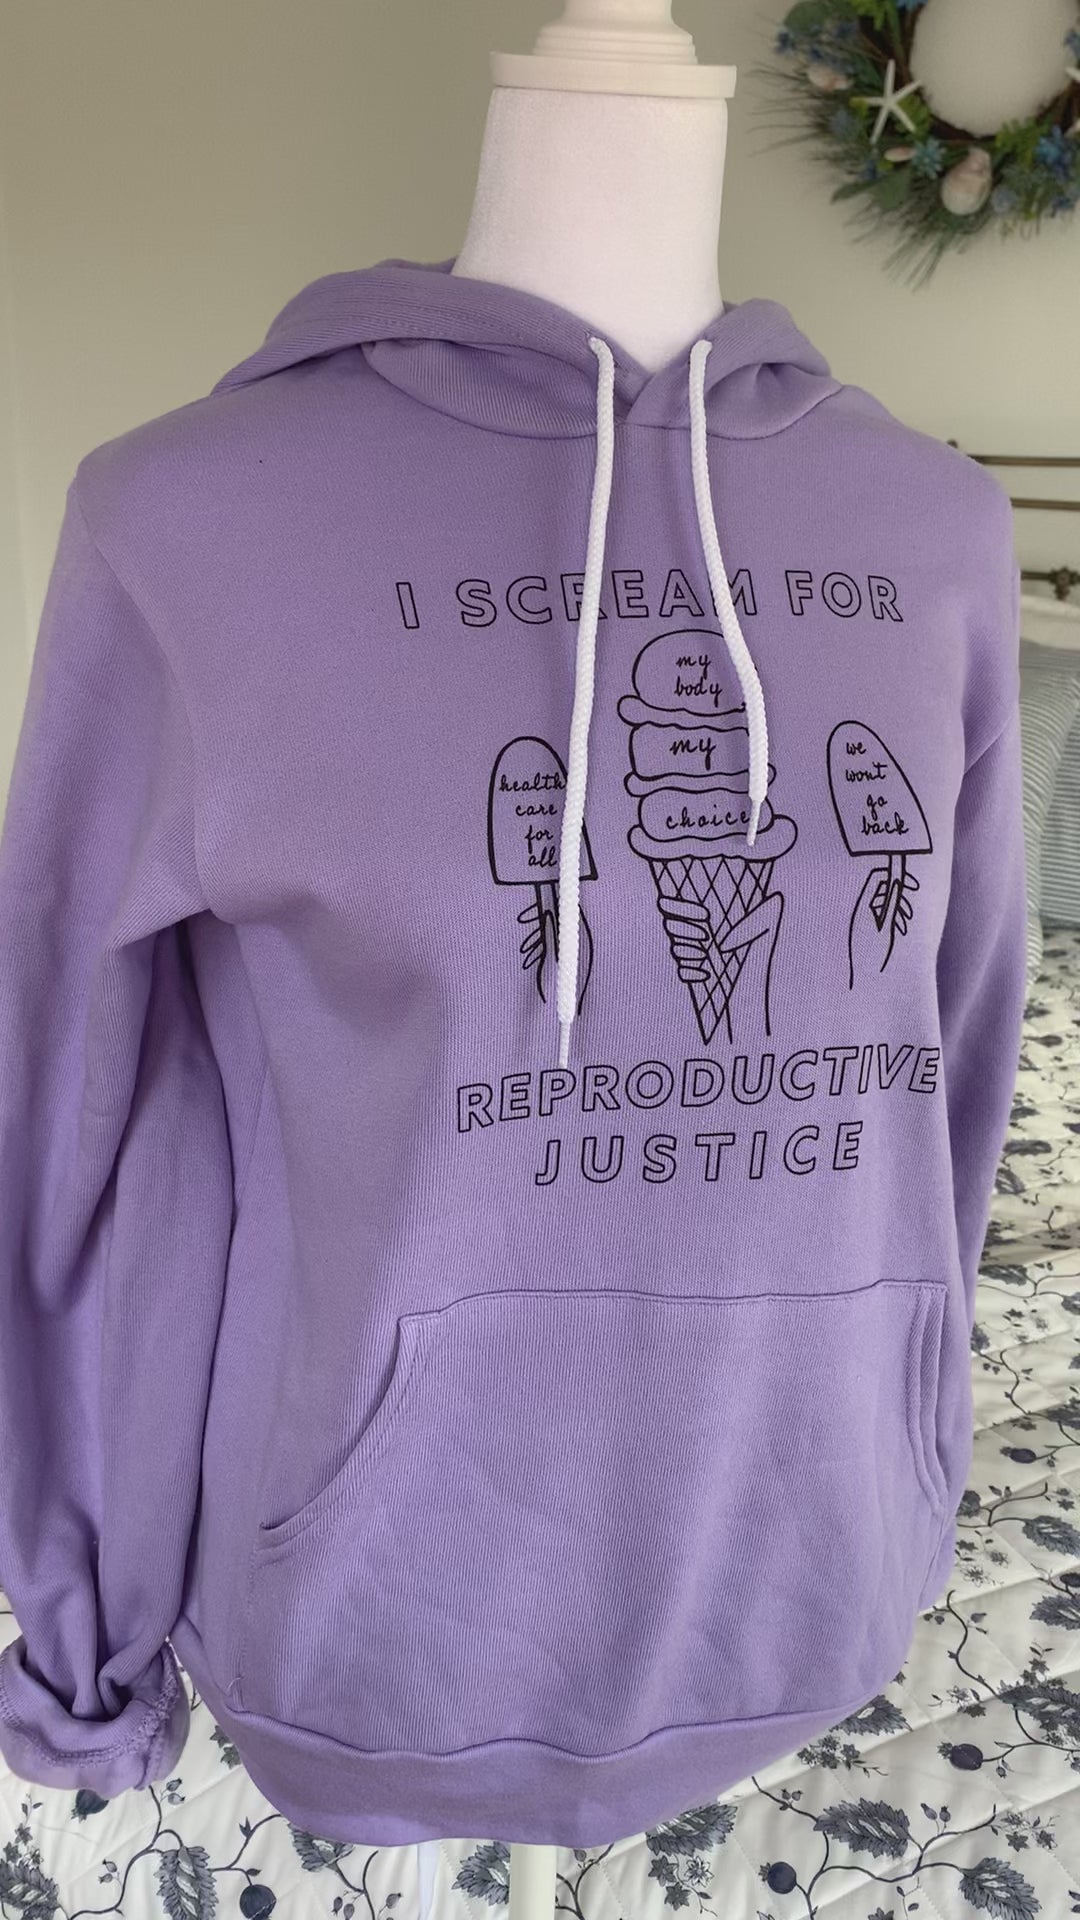 A lavender hoodie that reads "I scream for reproductive justice" hangs on a manikin